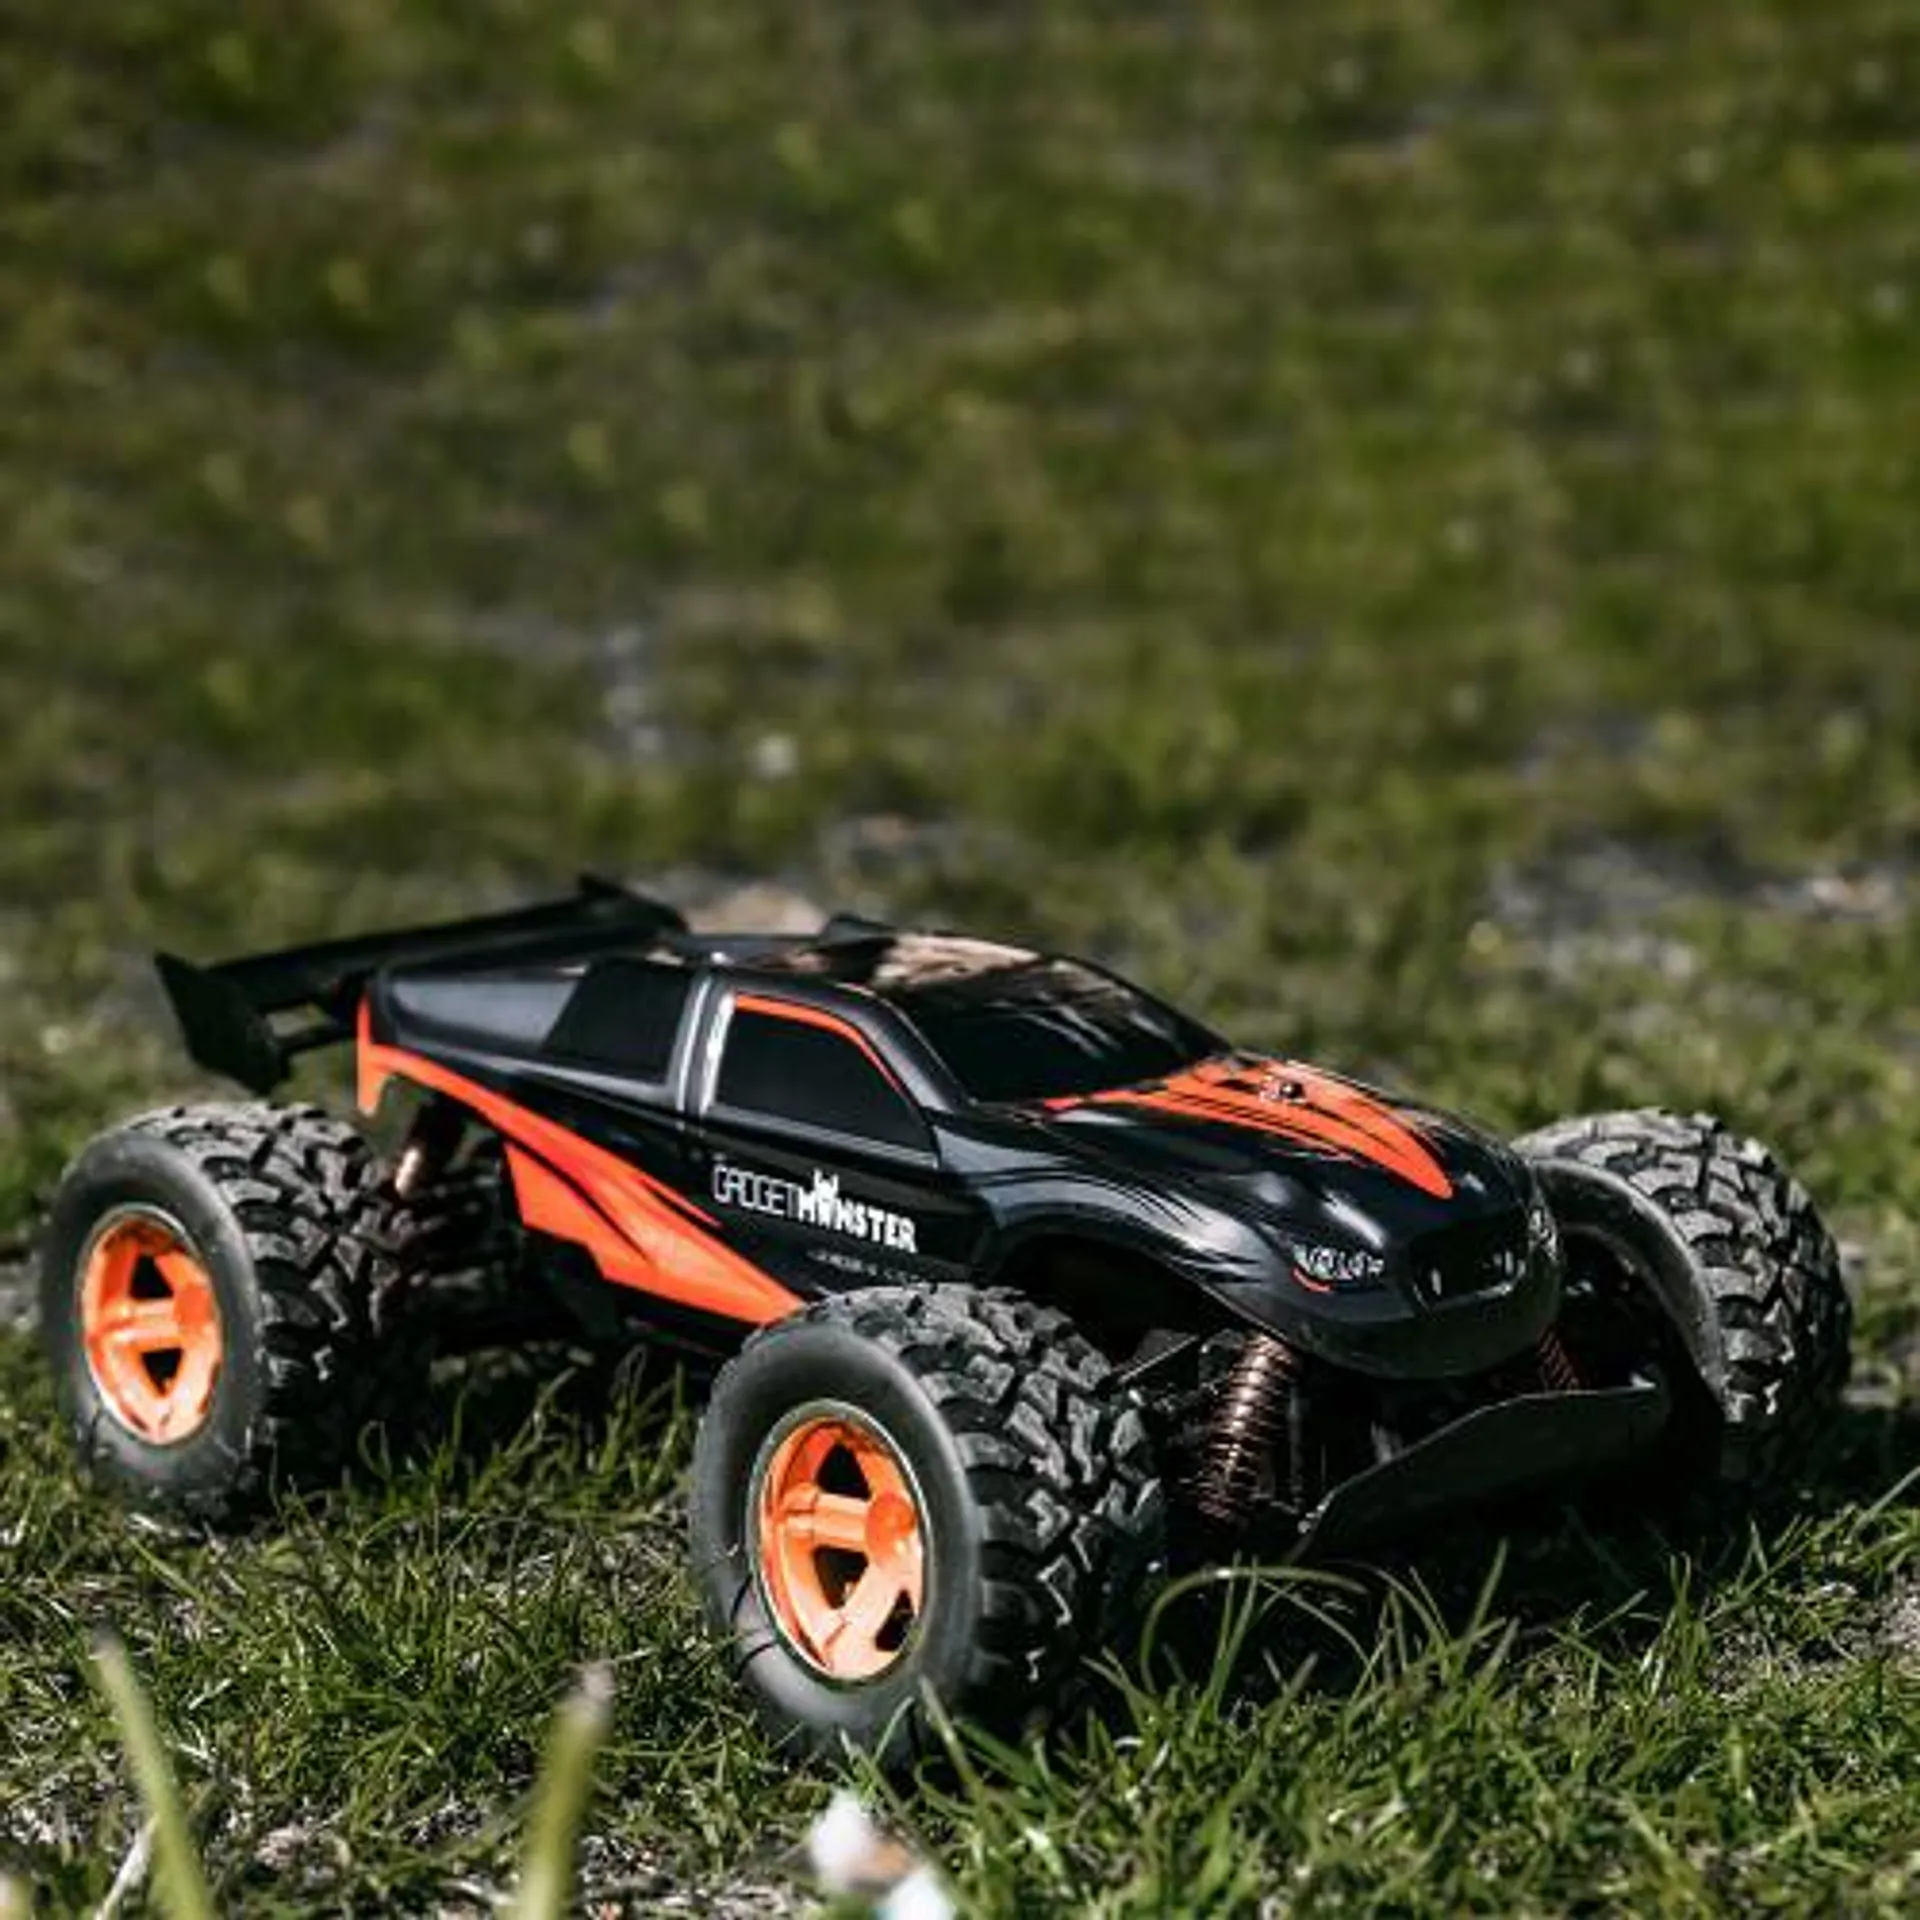 Remote Control Monster Truck 1:14 Scale by GadgetMonster